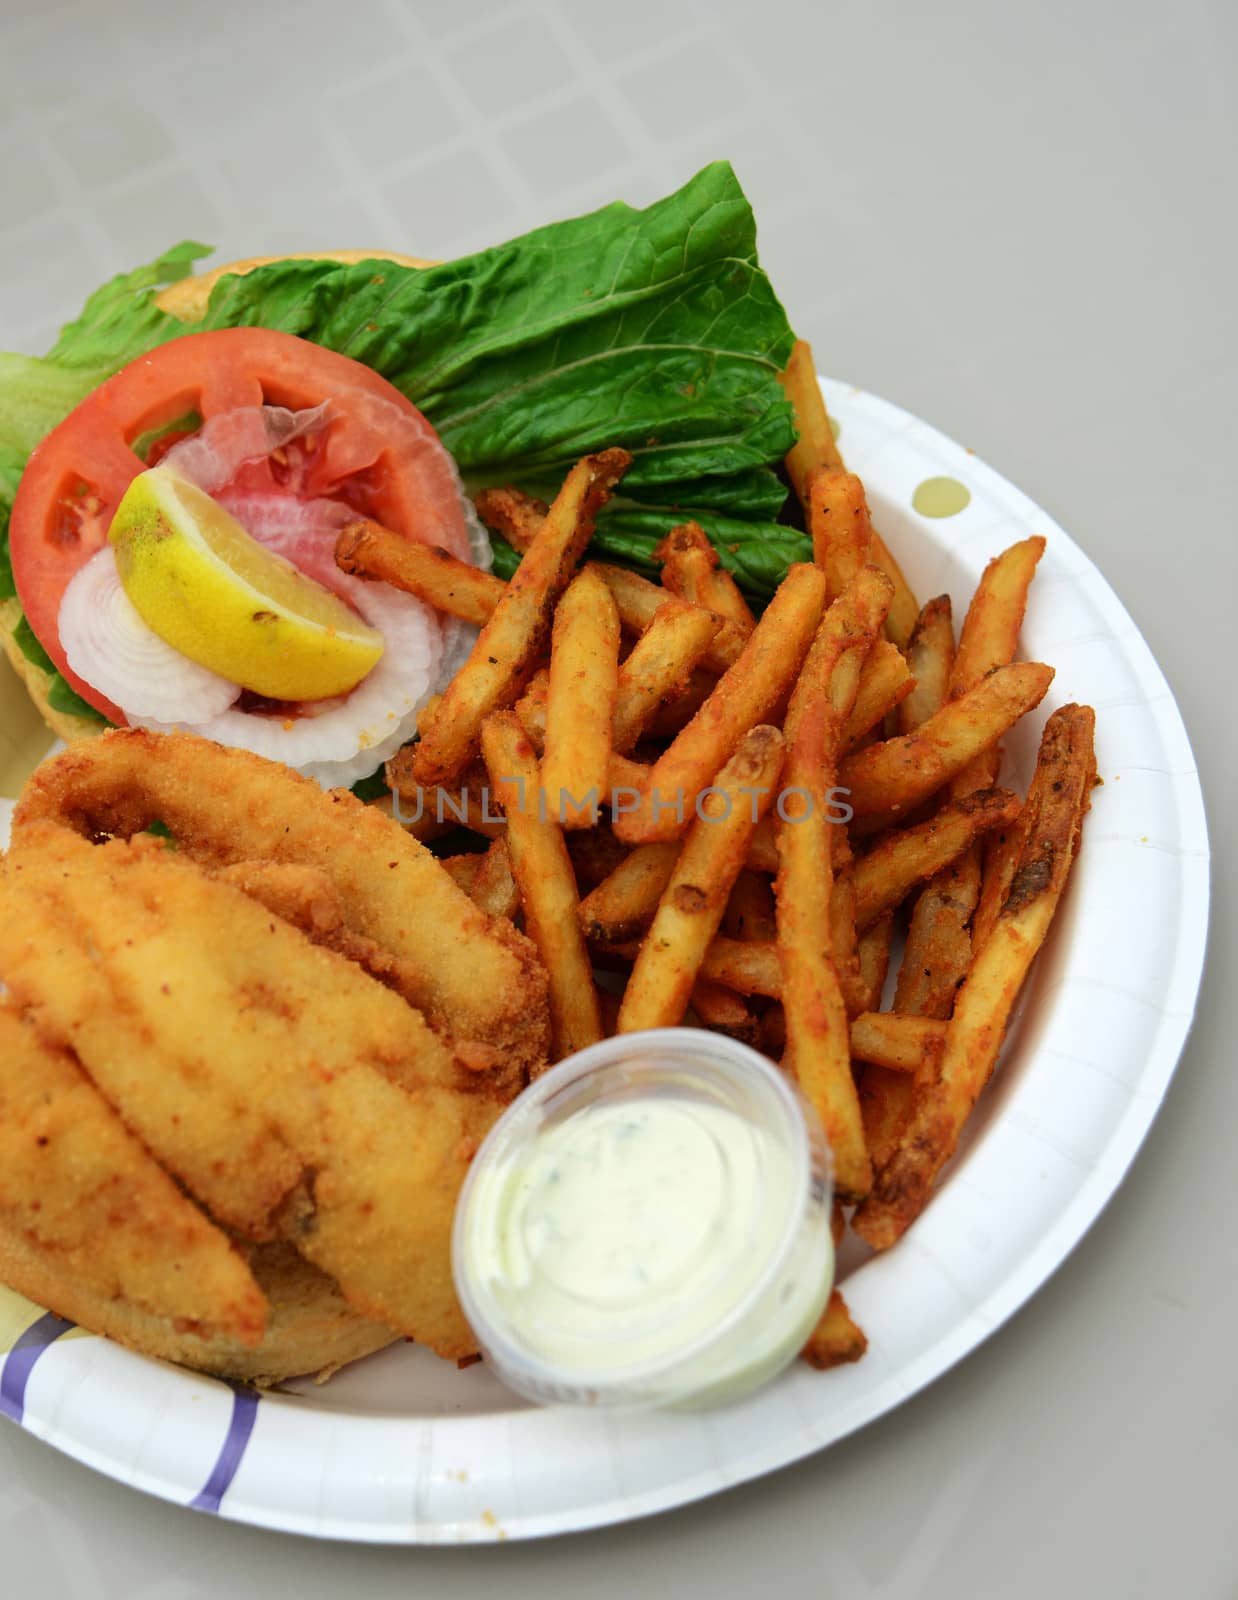 fish sandwich and fries by ftlaudgirl